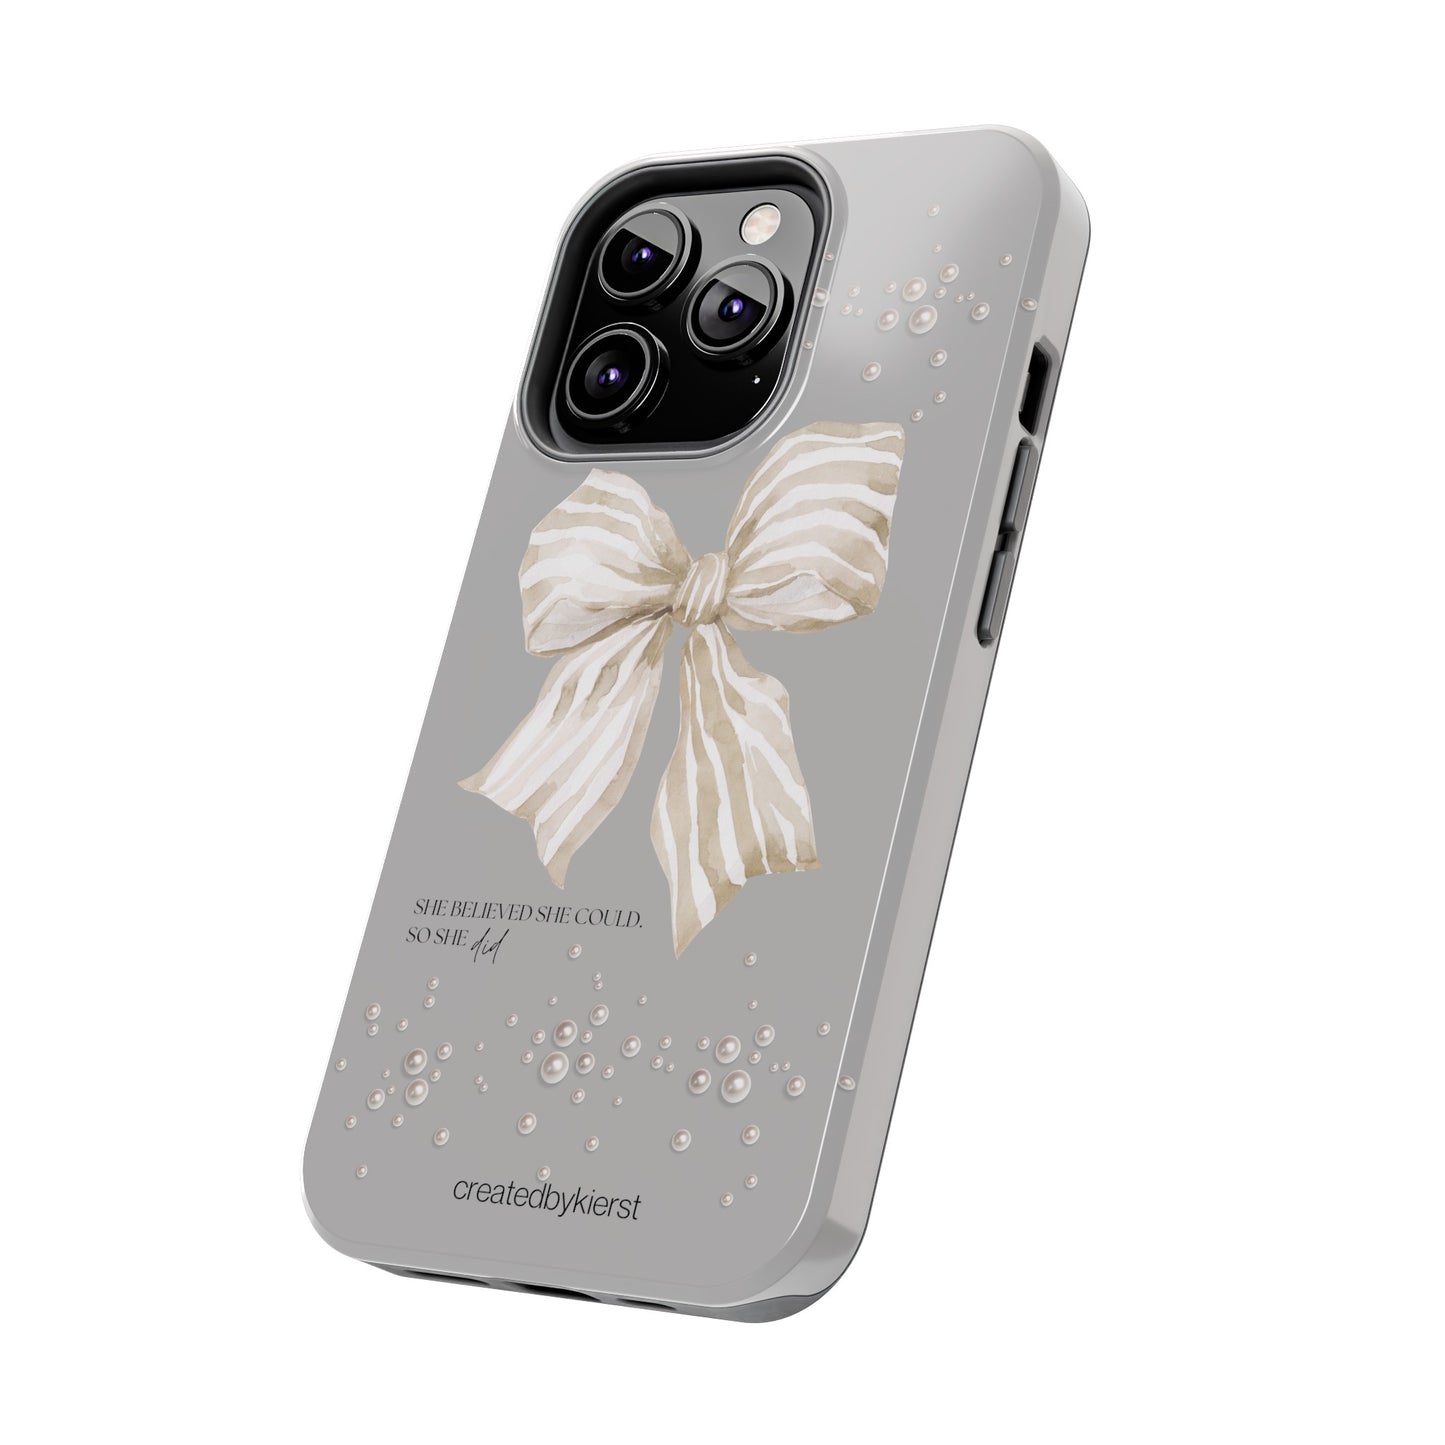 Tan and White Bow With Pearls on Grey She Believed She Could iPhone Case